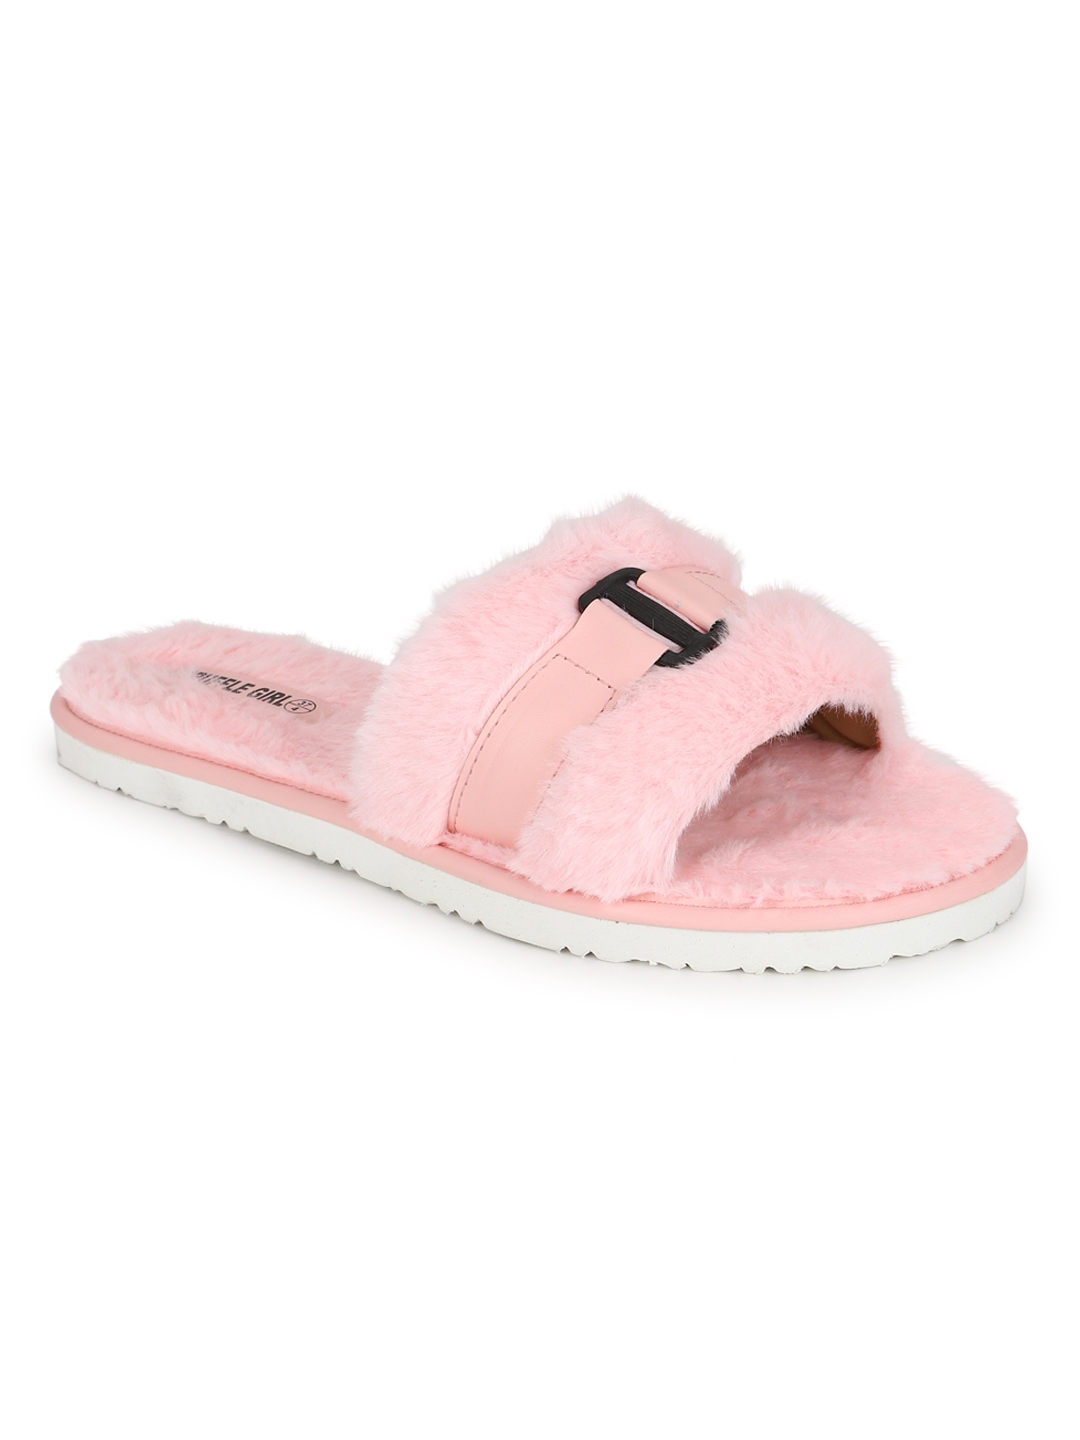 Truffle Collection | Pink Fuzzy Fur Slip Ons With Buckle